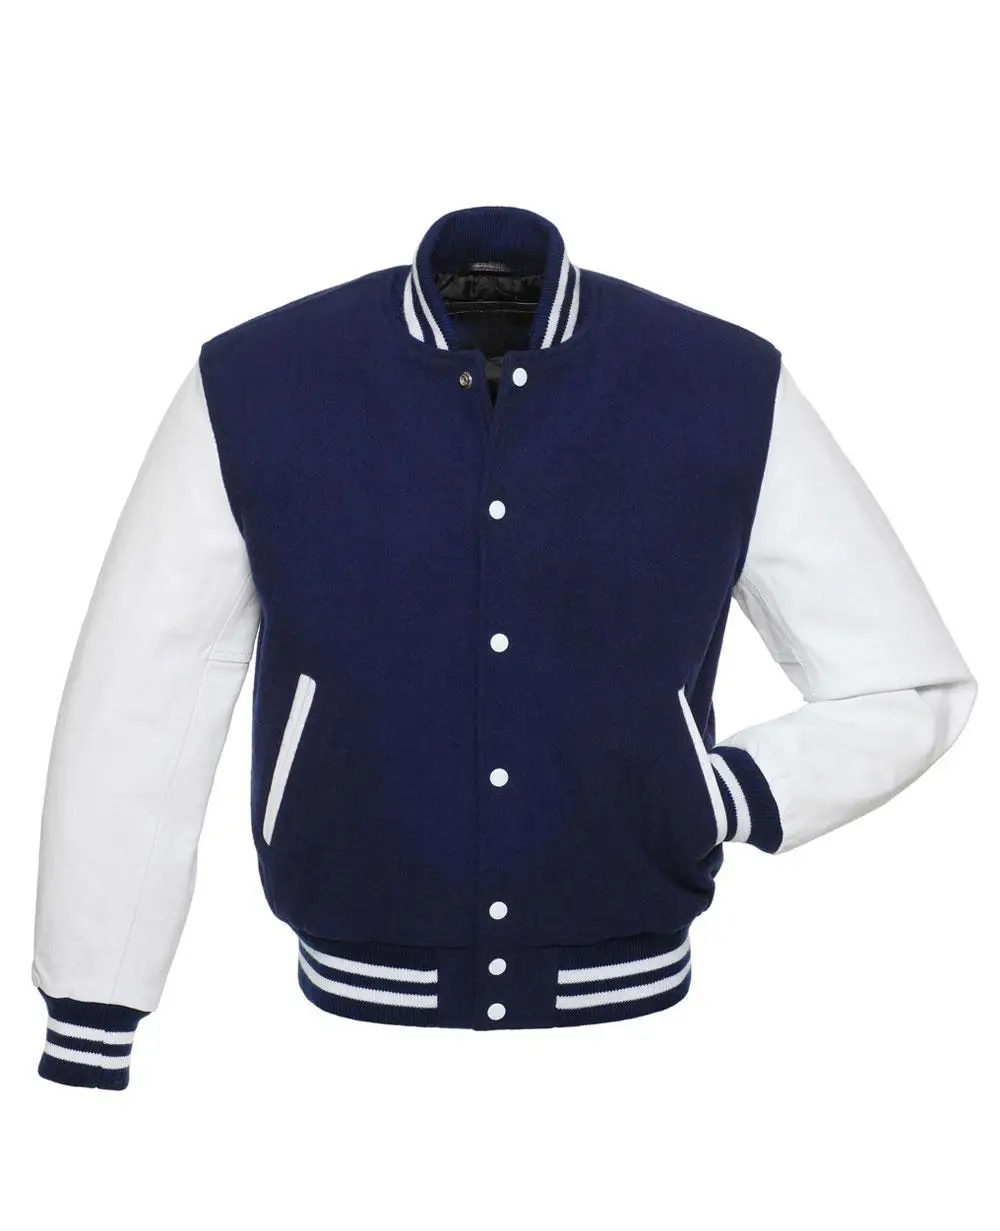 American Clothing Jacket, College Jacket College